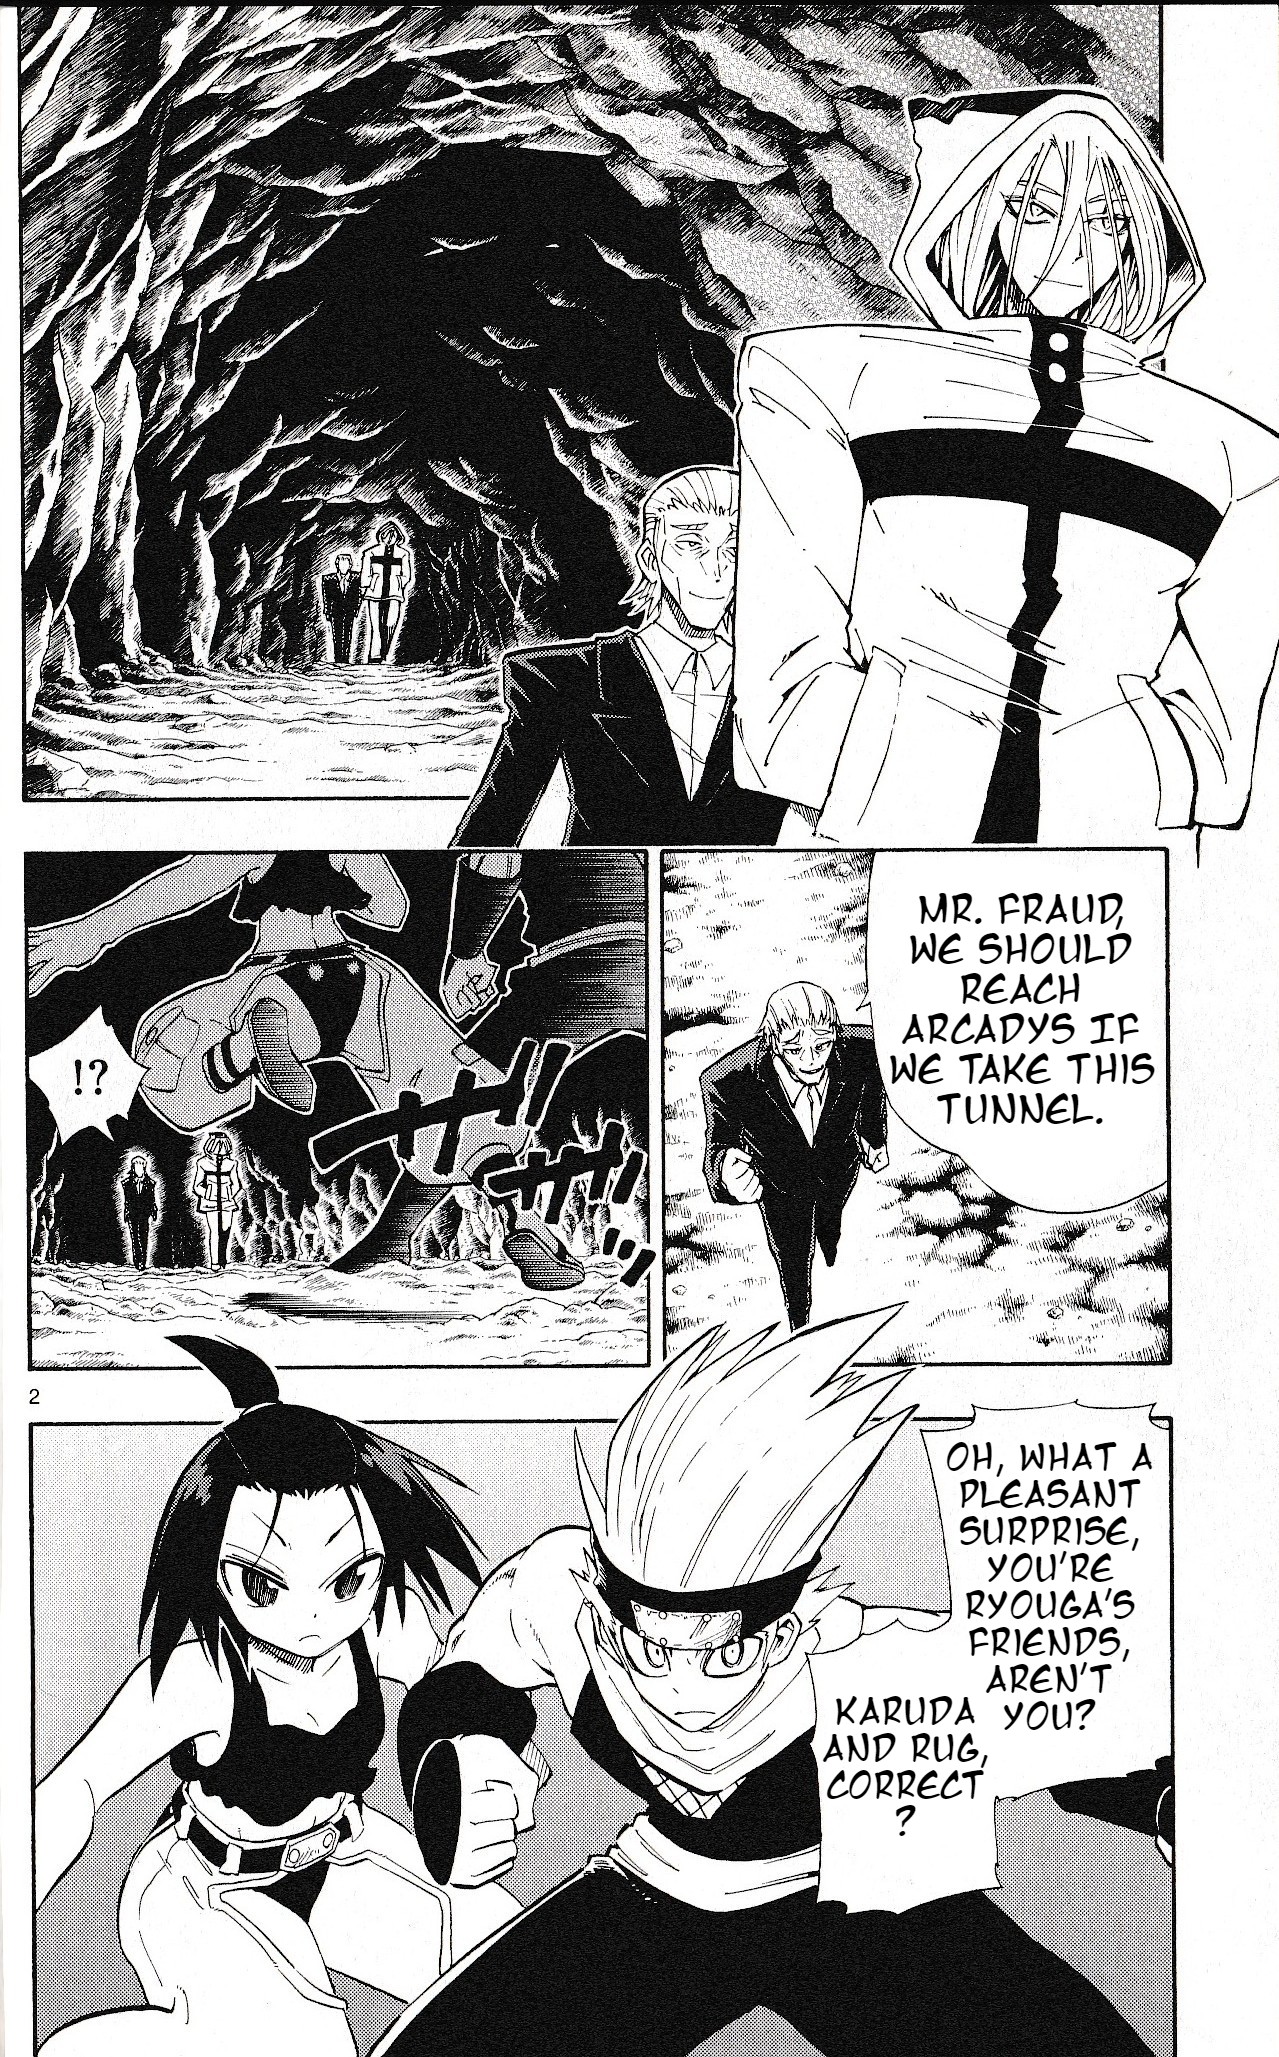 Pocket Monster Reburst Vol.8 Chapter 72: The One Would Would Be Arcadys - Picture 2